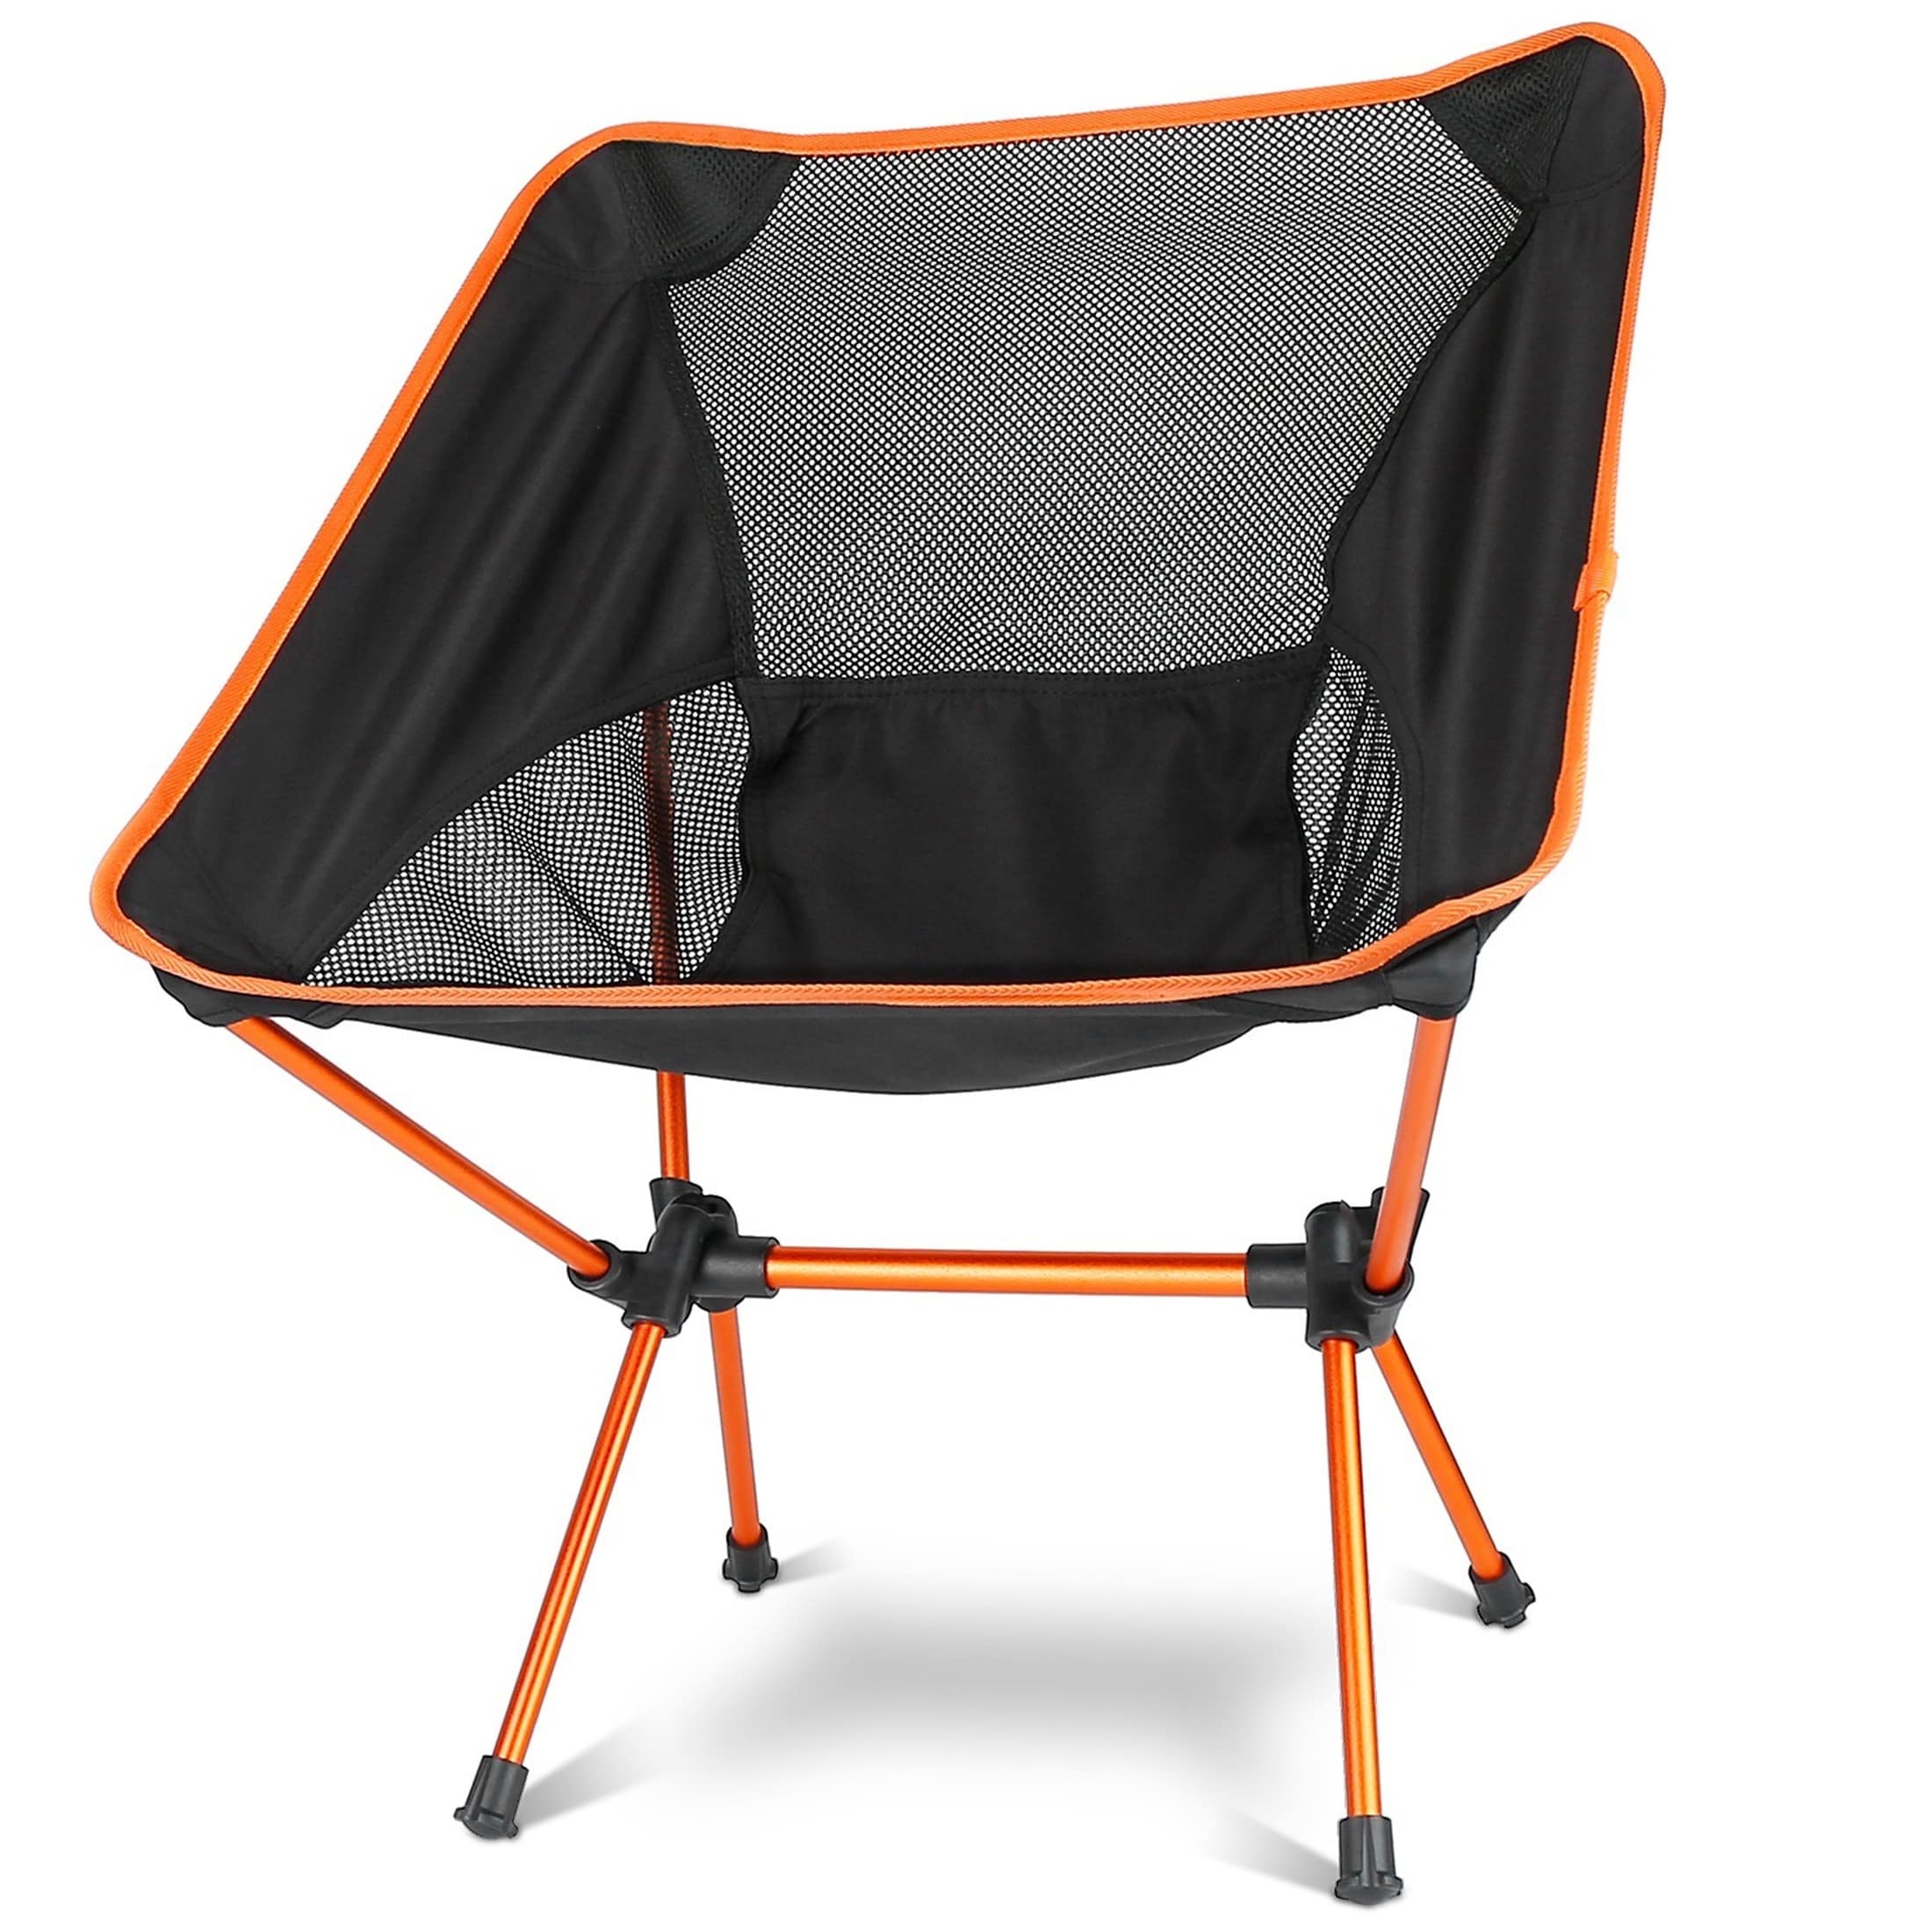 Foldable Camping Chair Collapsible Ultralight Camping Chair